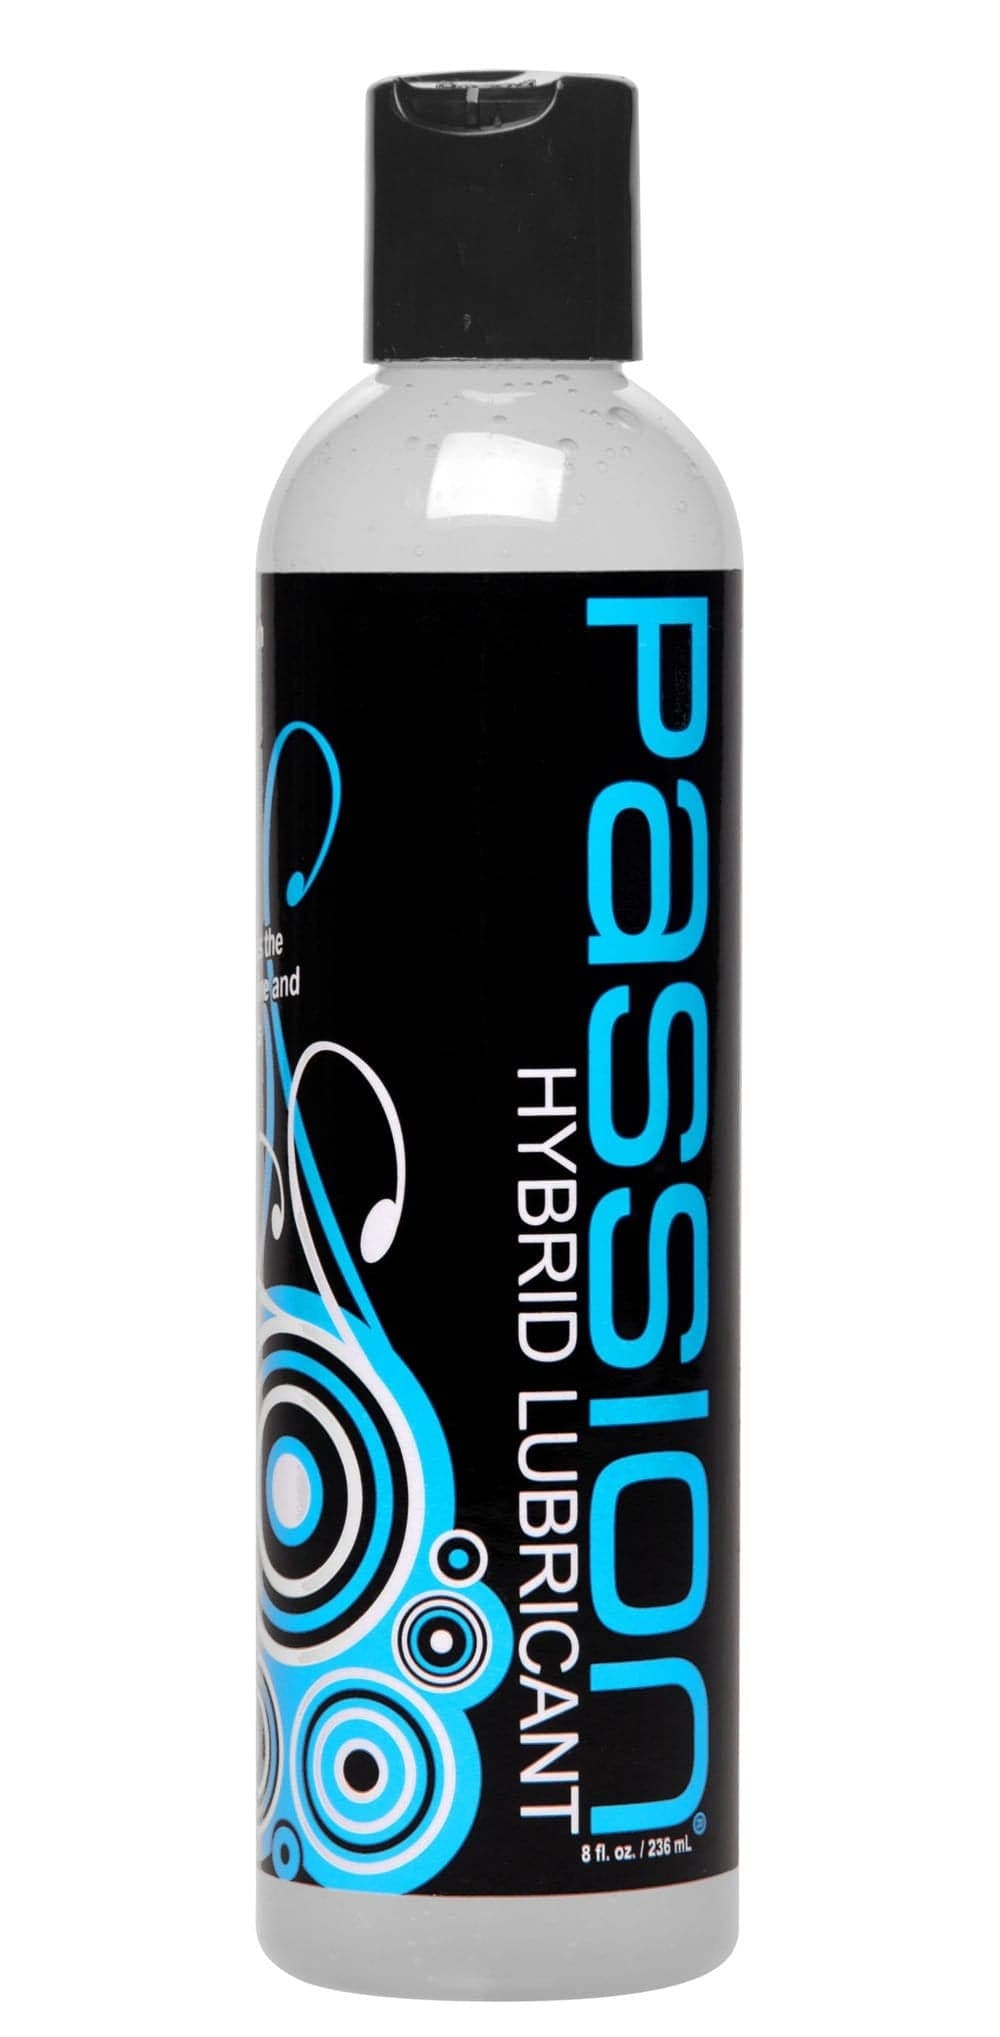 passion hybrid water and silicone blind lubricant 8 oz